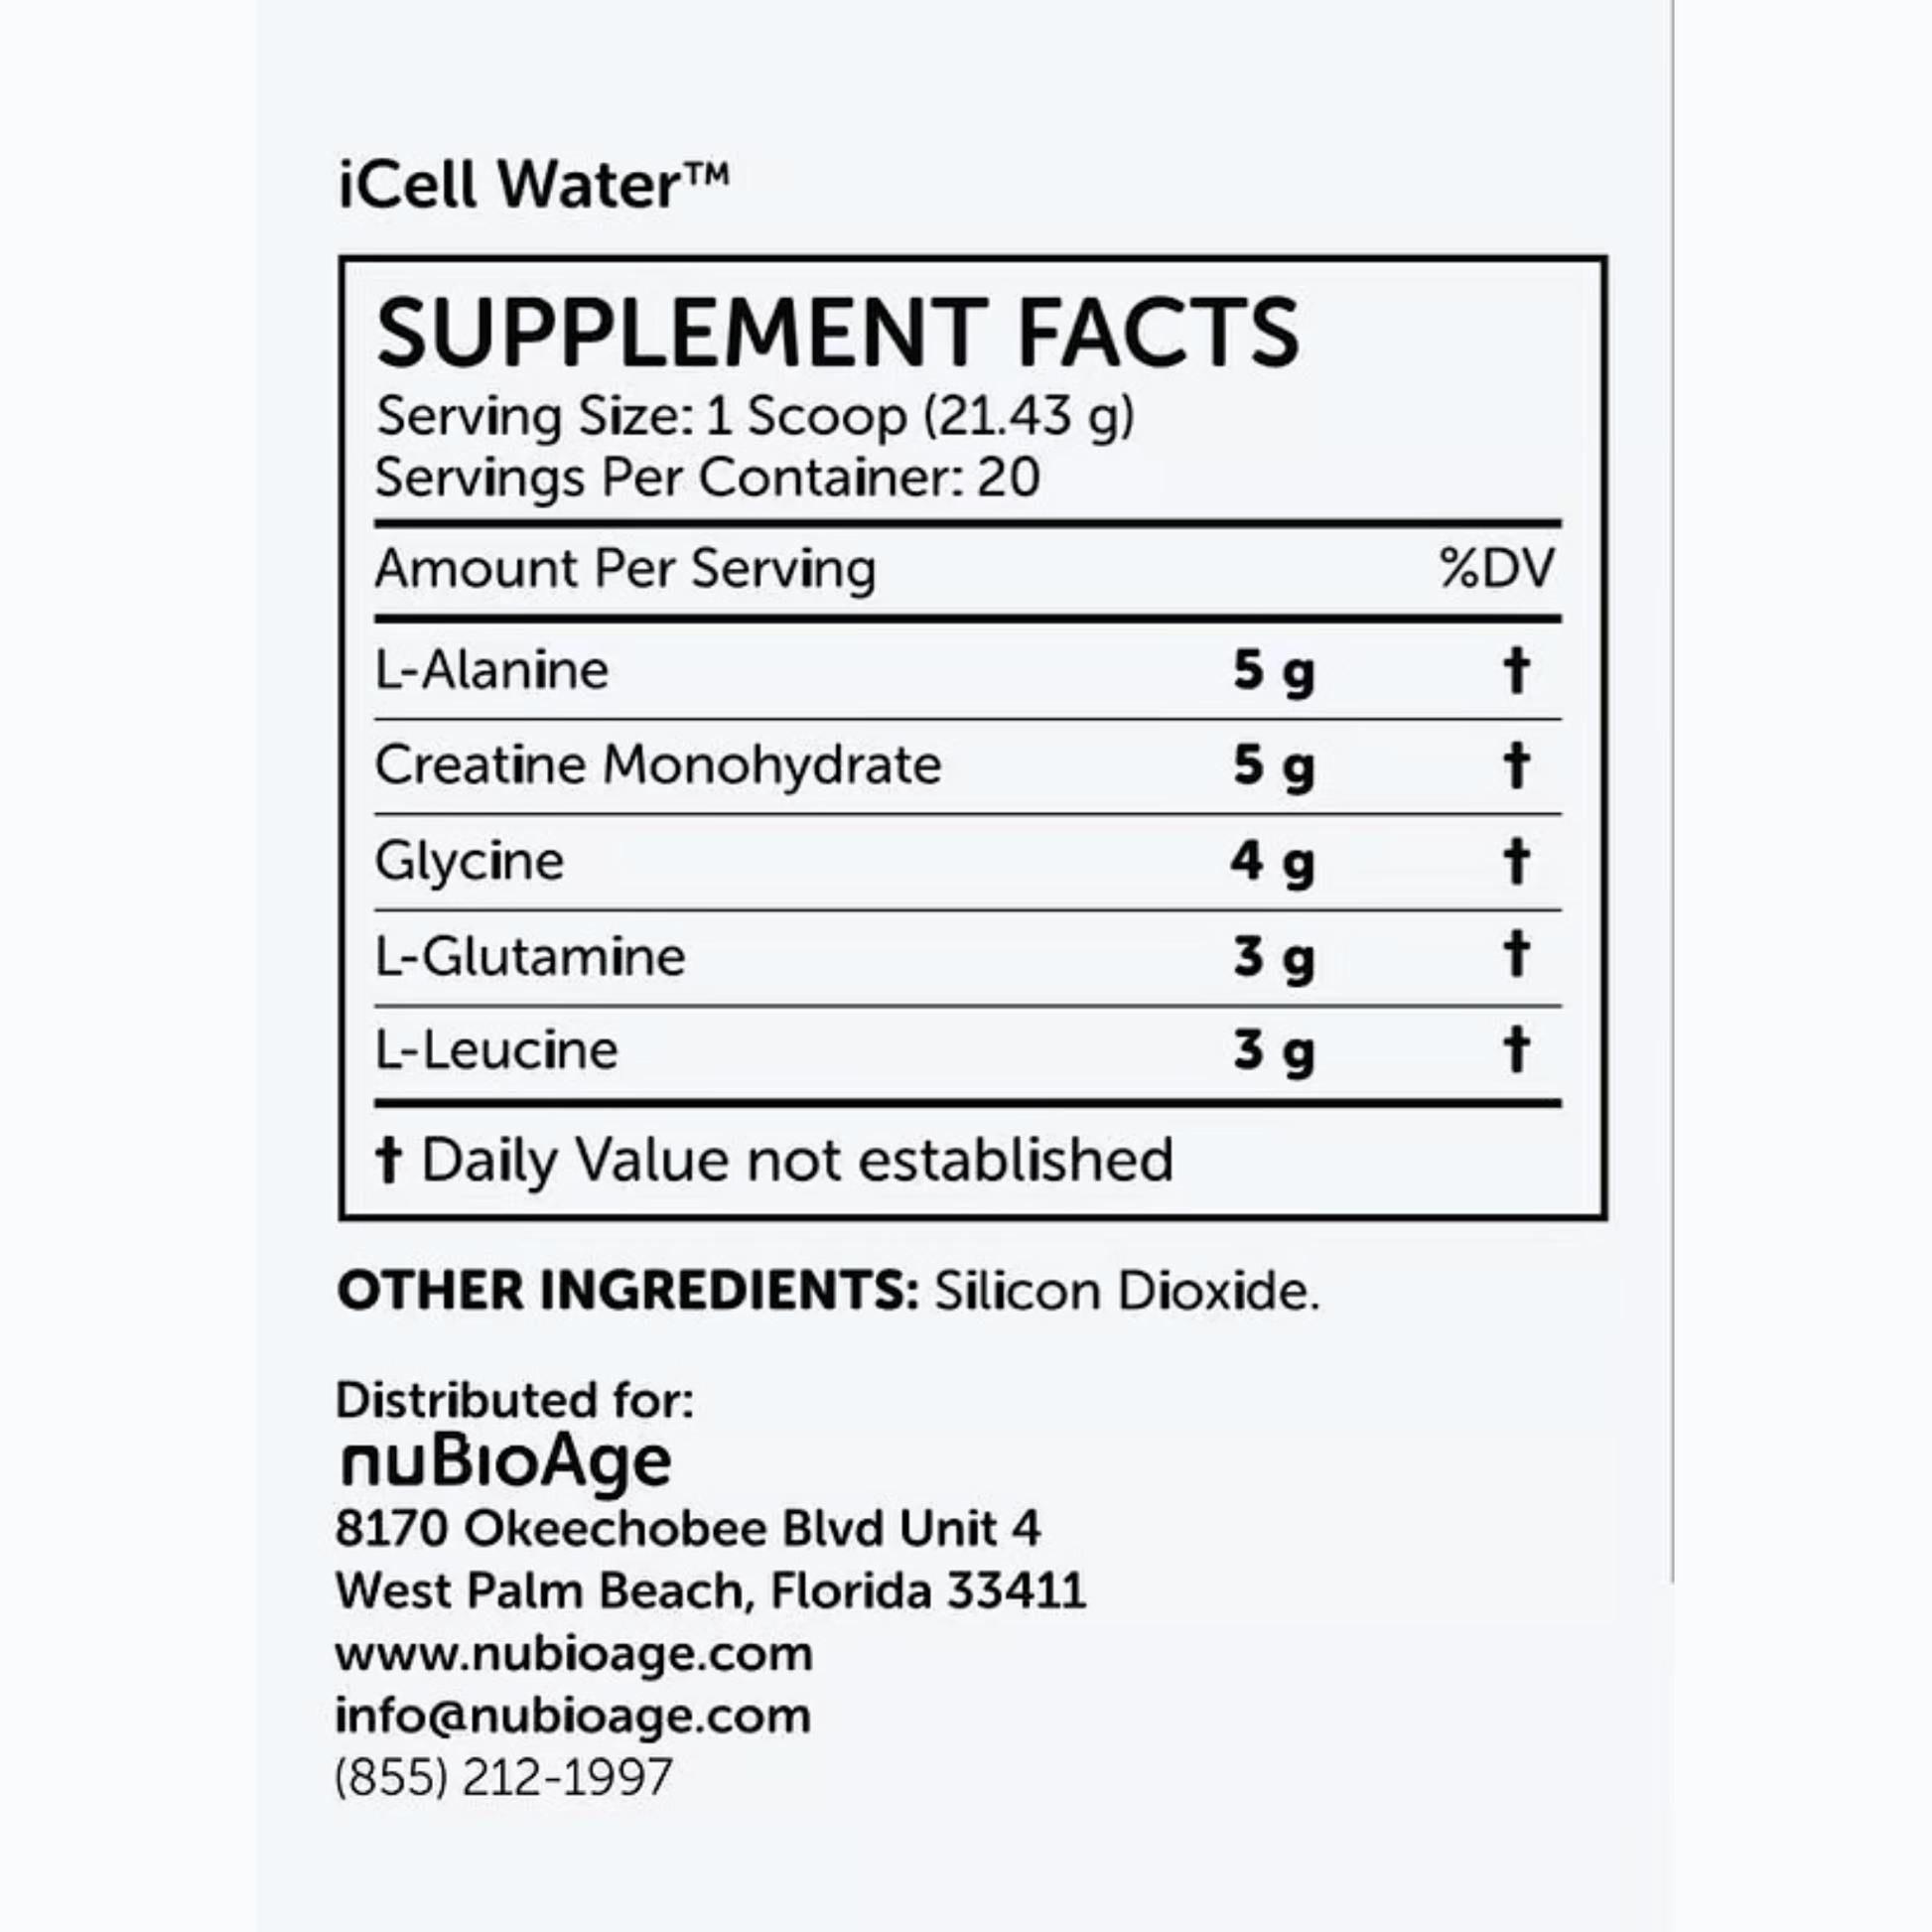 iCell Water Nubioage ingredients